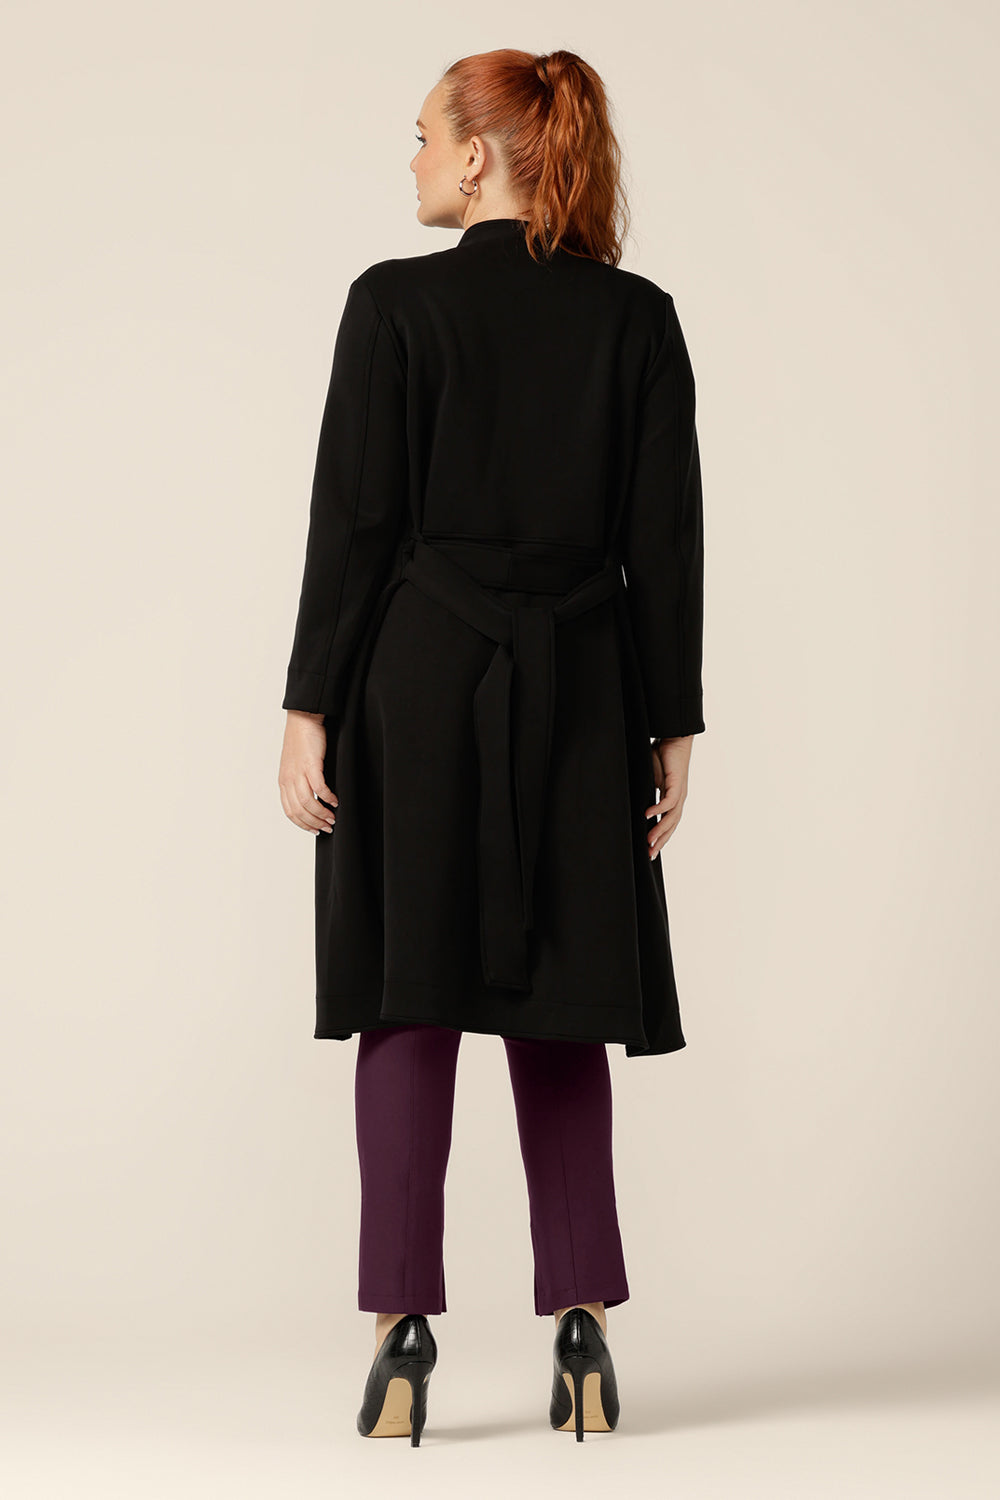 Back view of a curvy size, 12 woman wearing a softly tailored black trenchcoat in modal fabric. Worn with mulberry slim leg pants, this is a great coat for winter layering and travel. Shop in sizes 8 to 24.